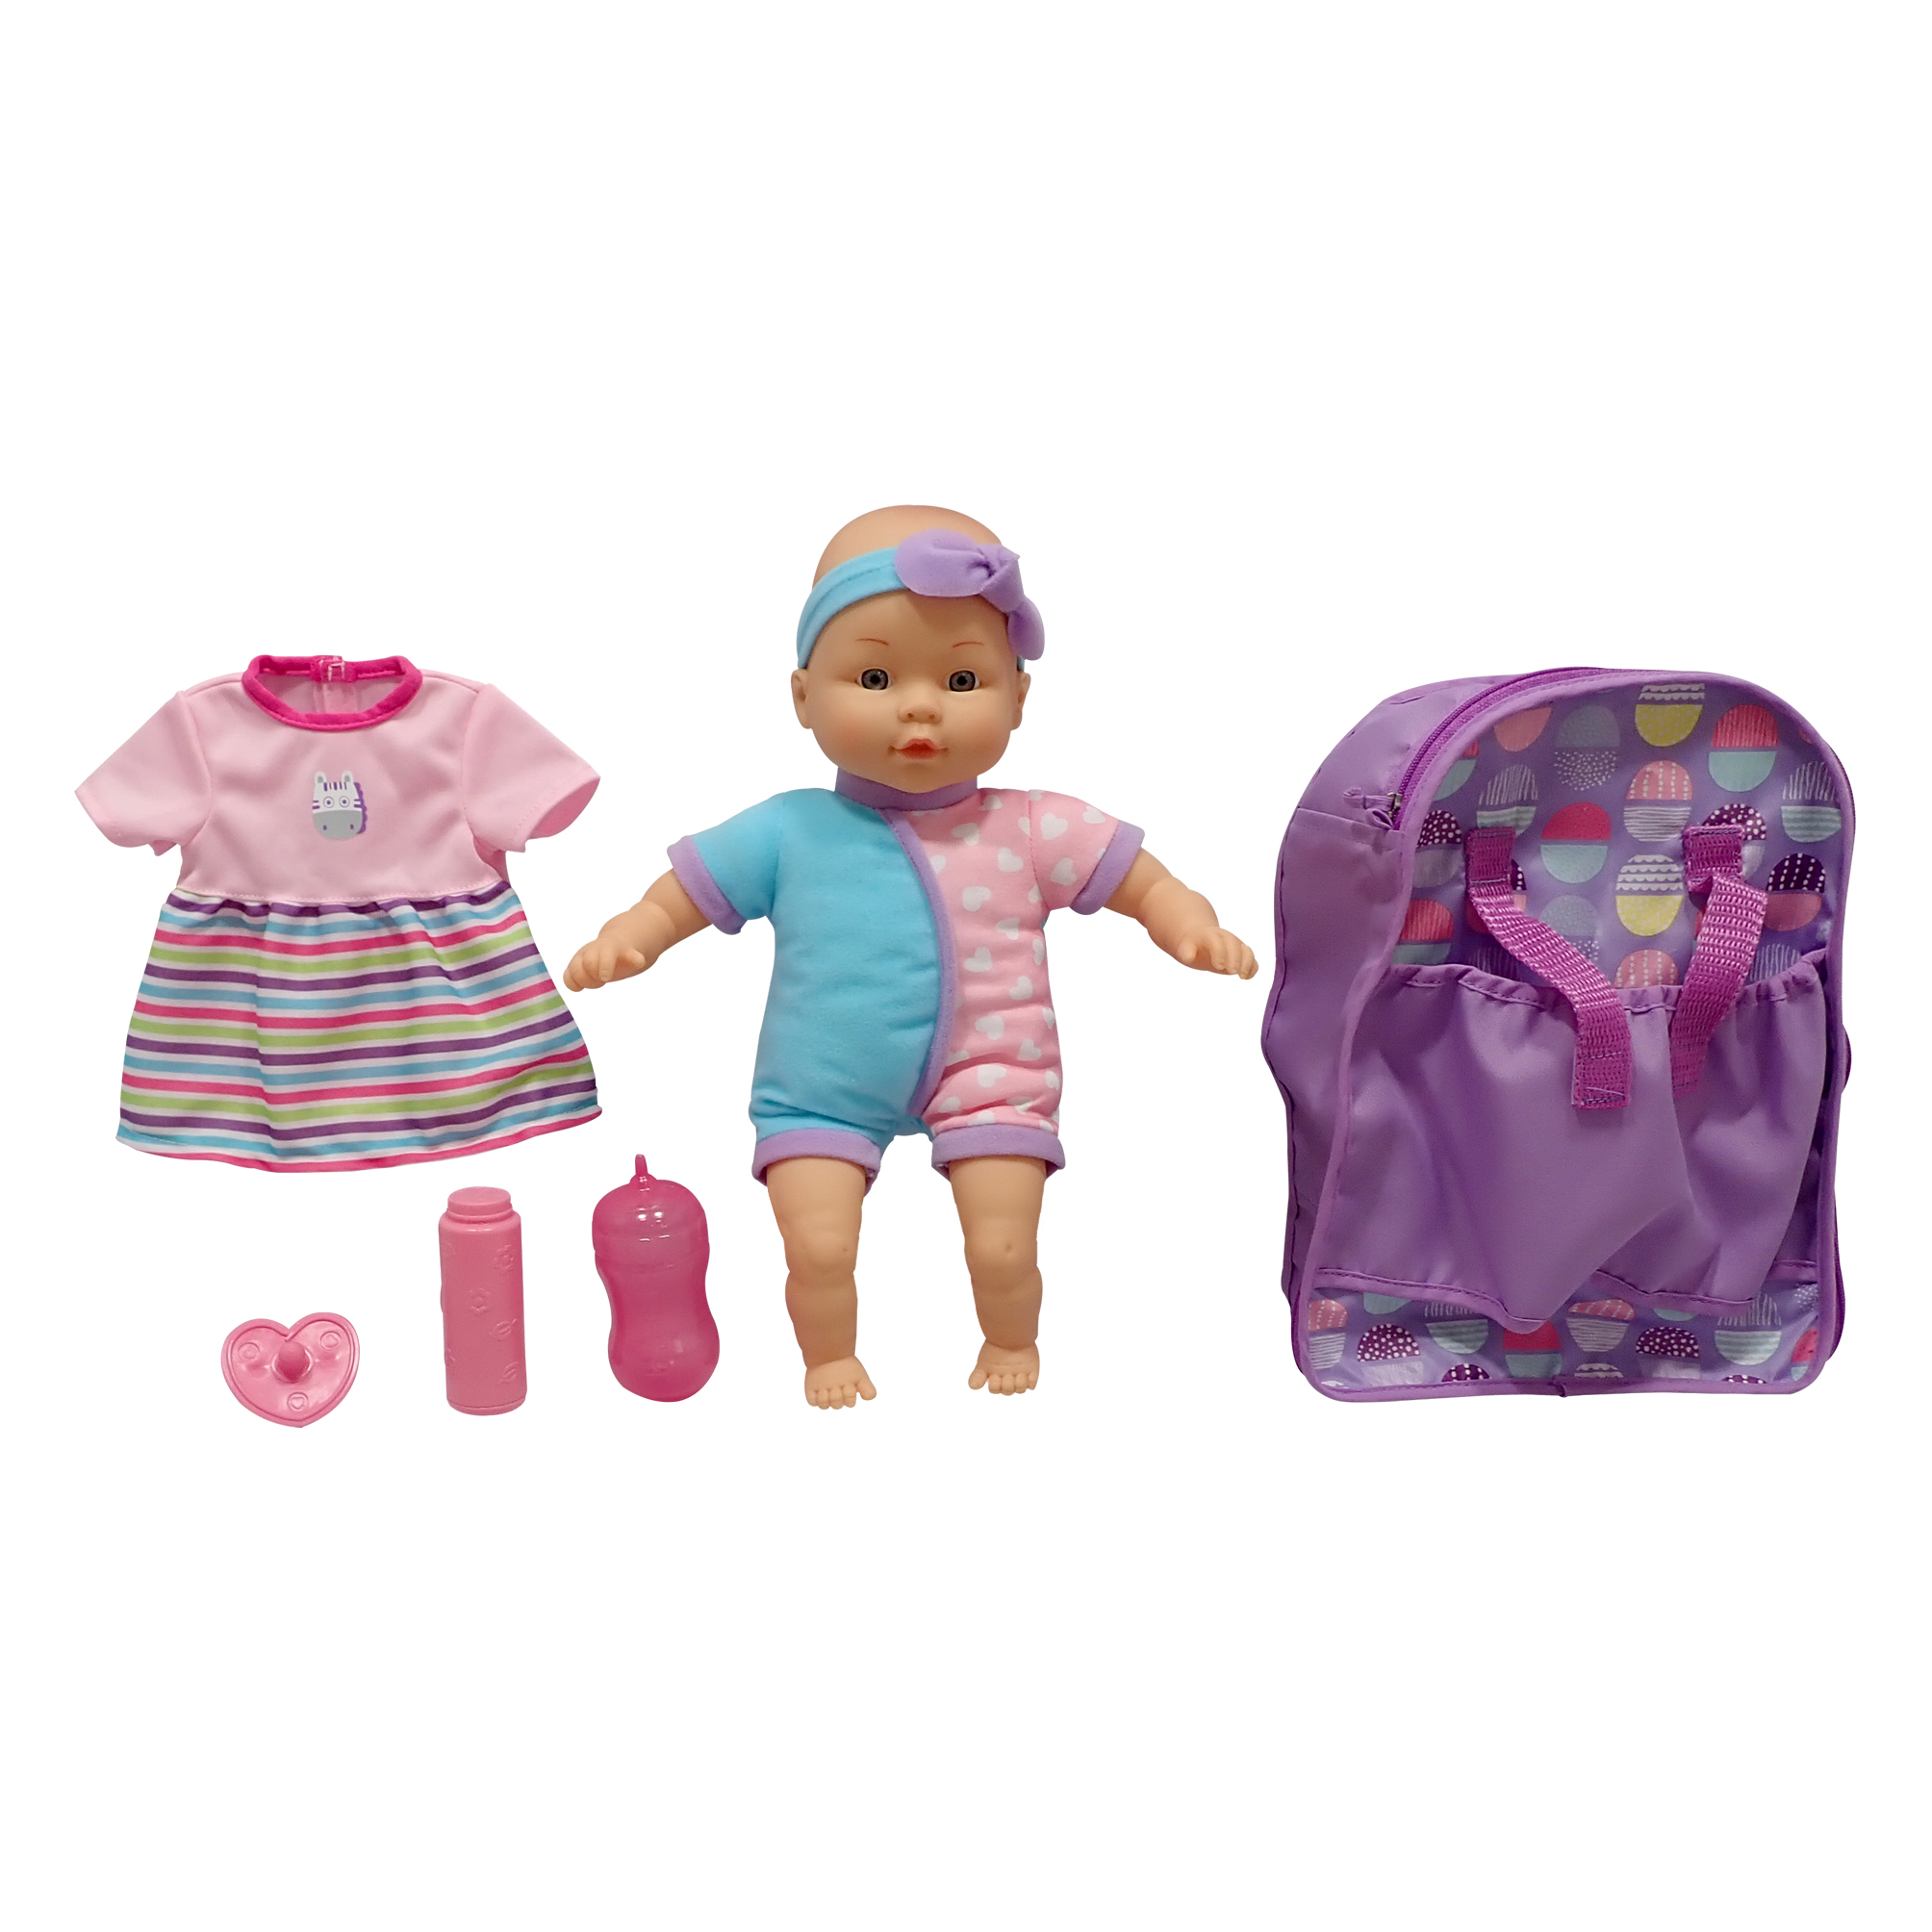 13 Inch Baby Doll with Carrying Case and Outfit